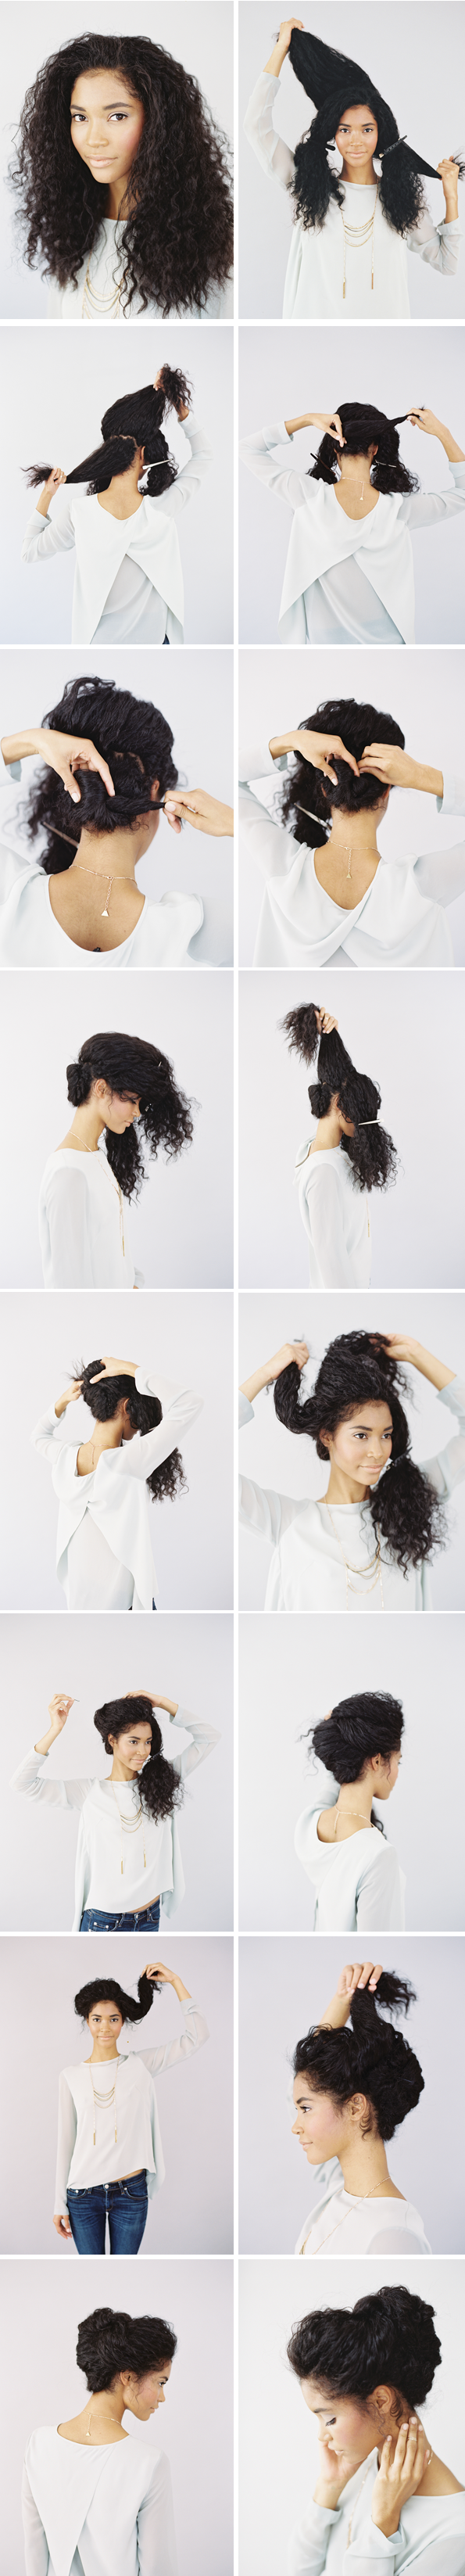 how-to-updo-naurally-curly-hair